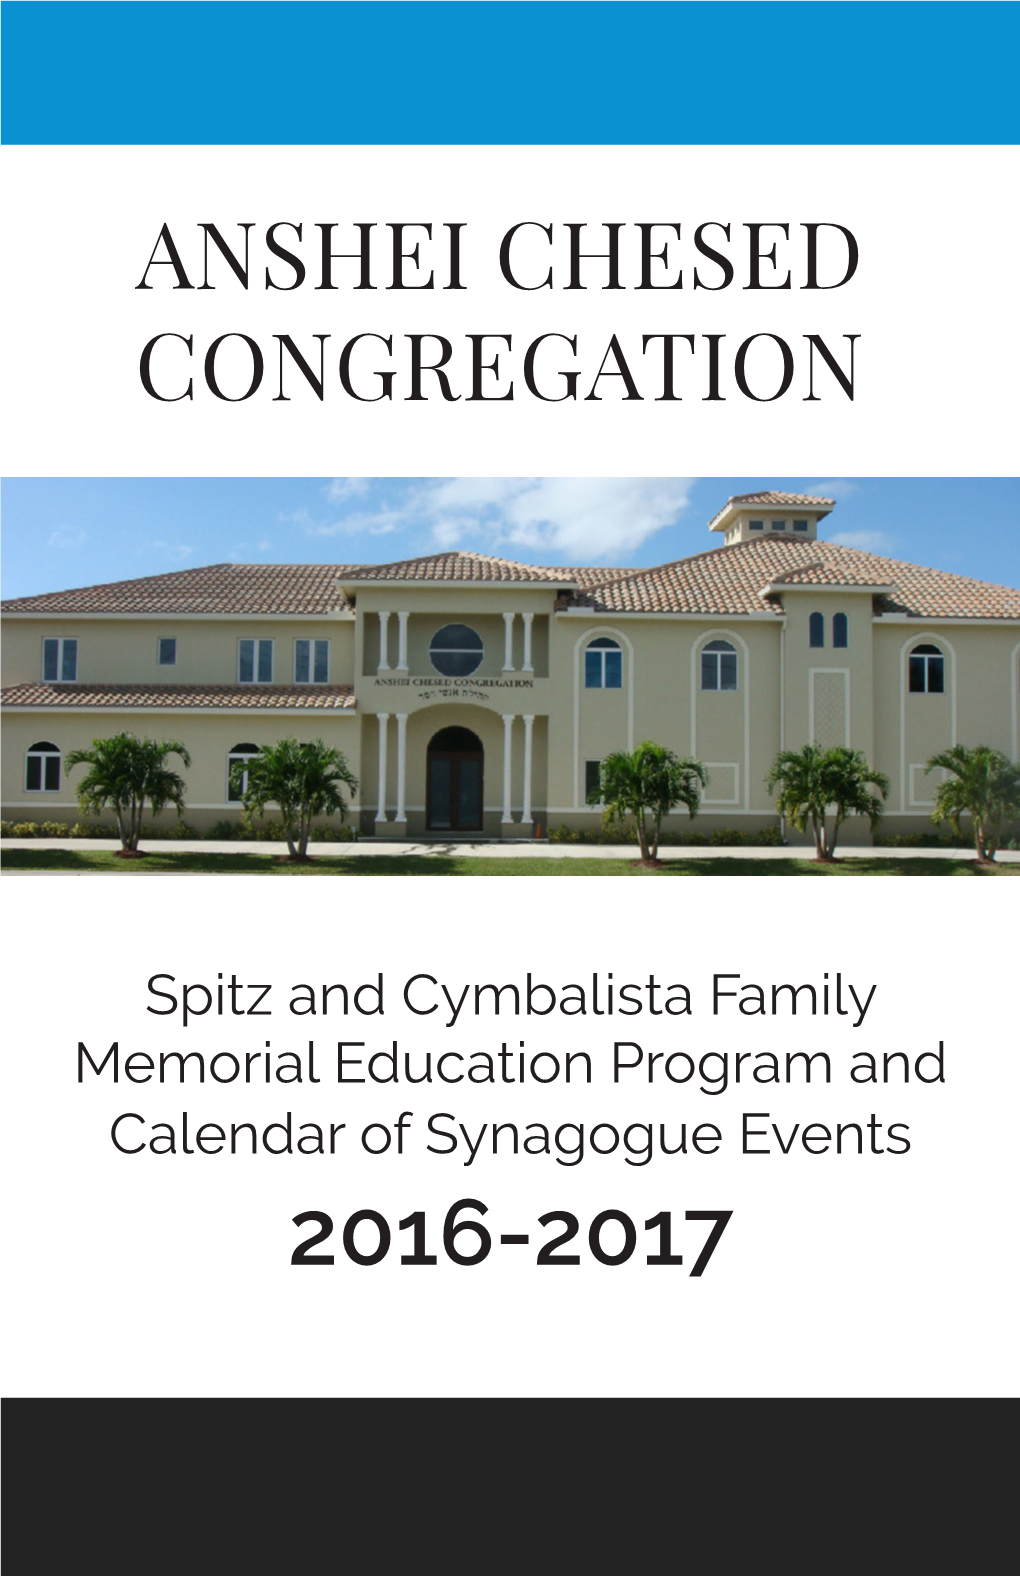 Anshei Chesed Congregation 2016-2017